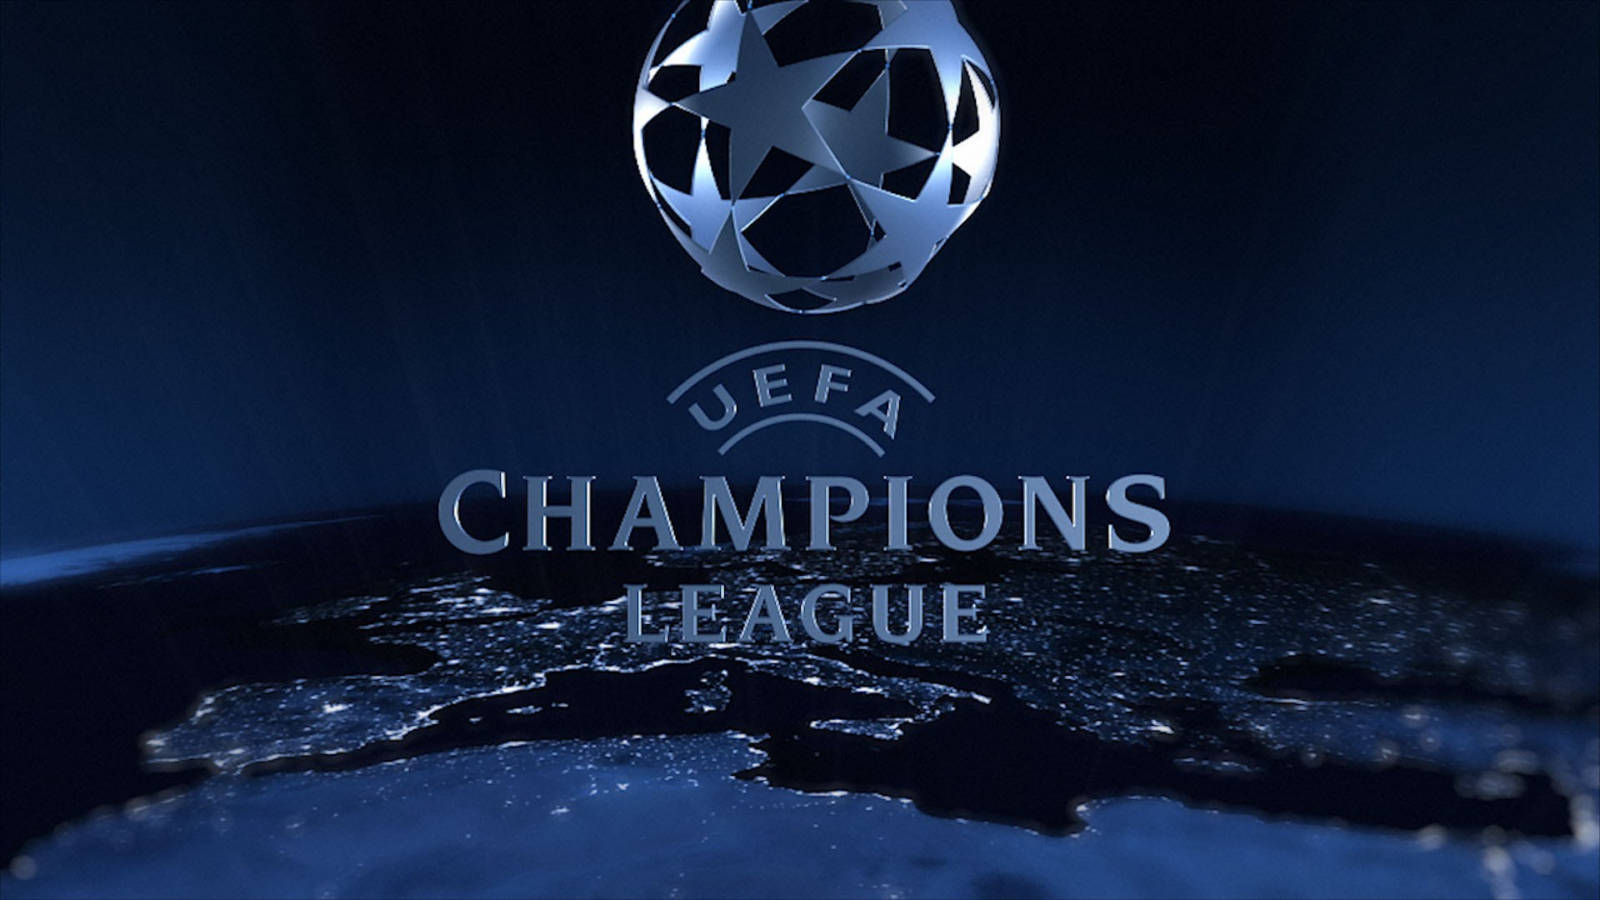 UEFA Champions League HD Wallpapers and Backgrounds